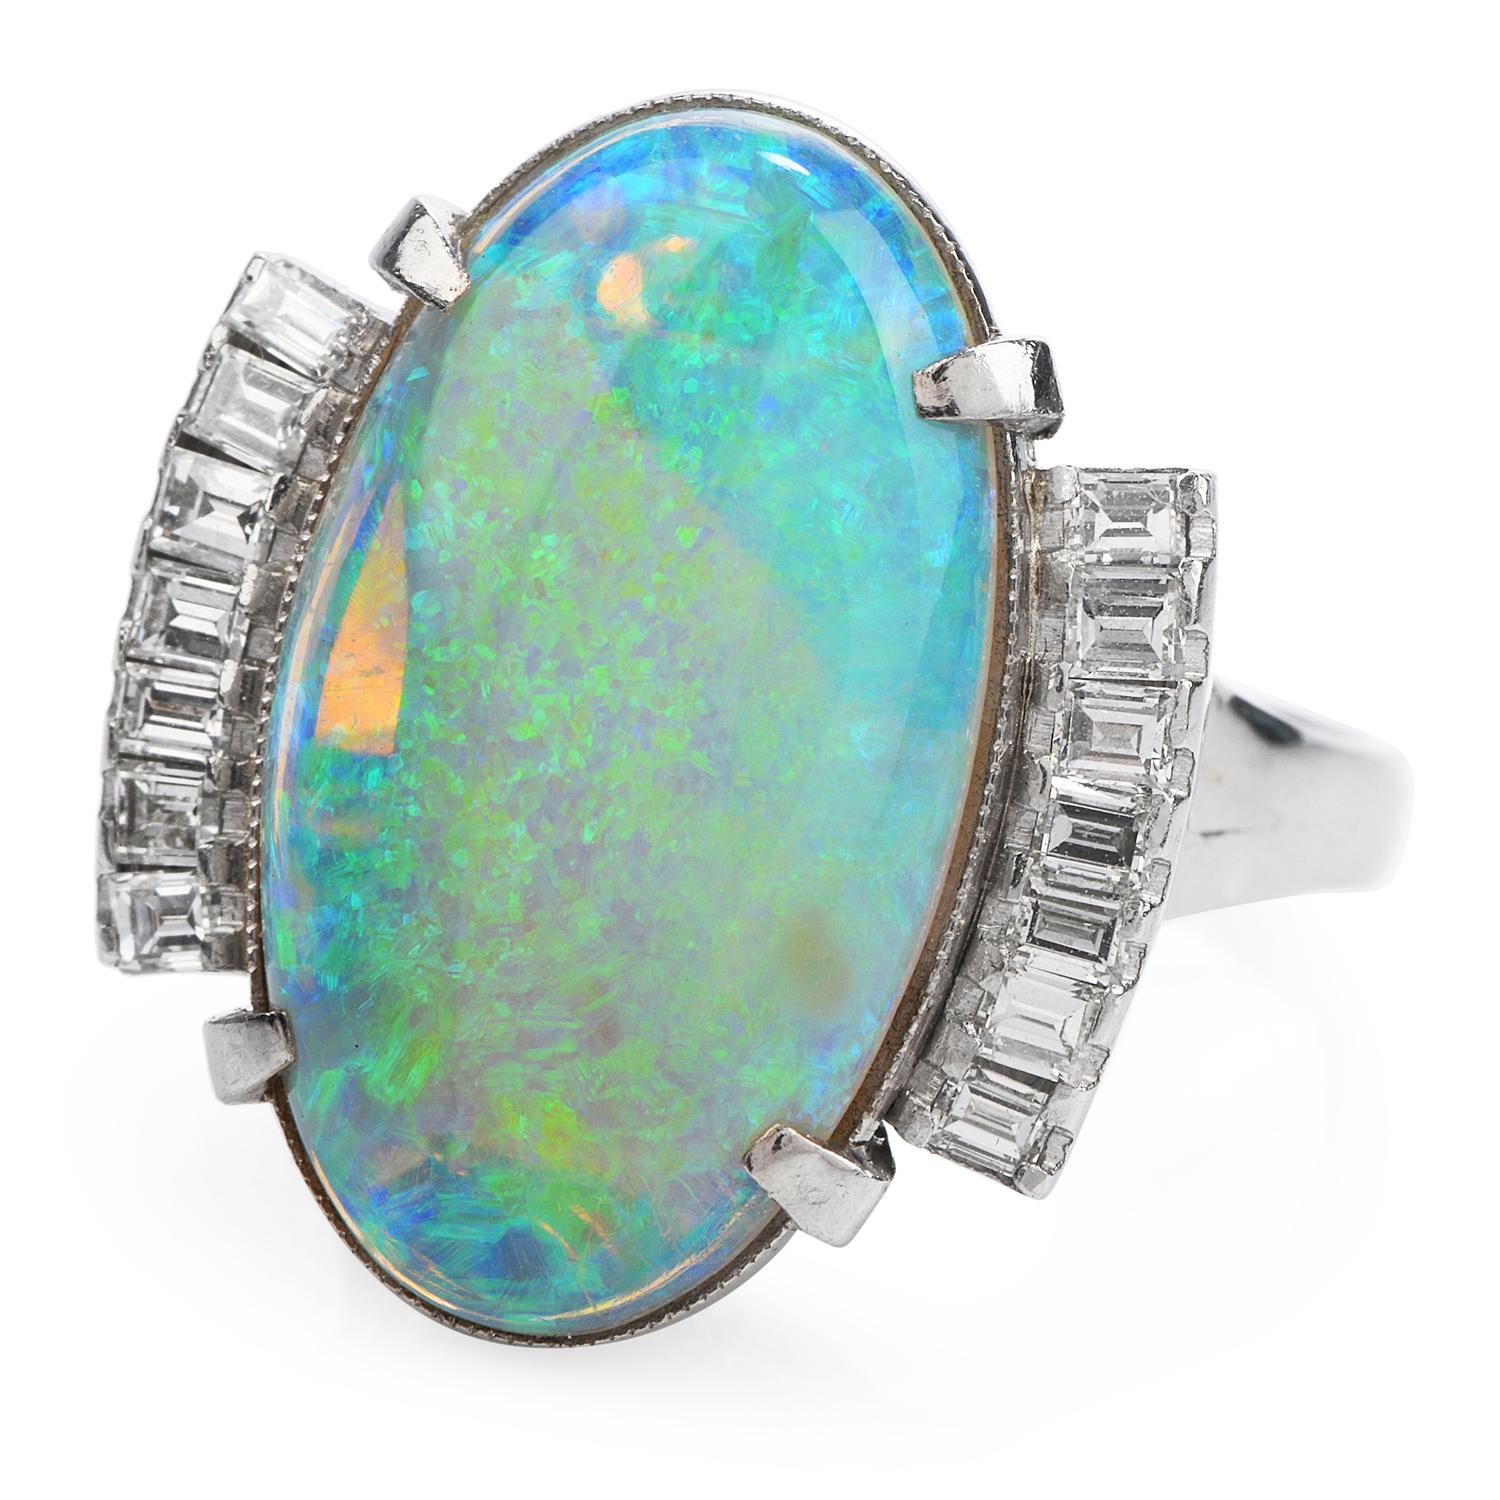 A Cocktail ring is worth more than a thousand Words!

 Crafted in Solid Platinum,

Weighing 11.1 grams and measuring 19 mm x 21 mm, 11 mm high,

The Color Display in this GIA Certified White Semi-Transparent Opal is Deep and Endless, shaped in Oval